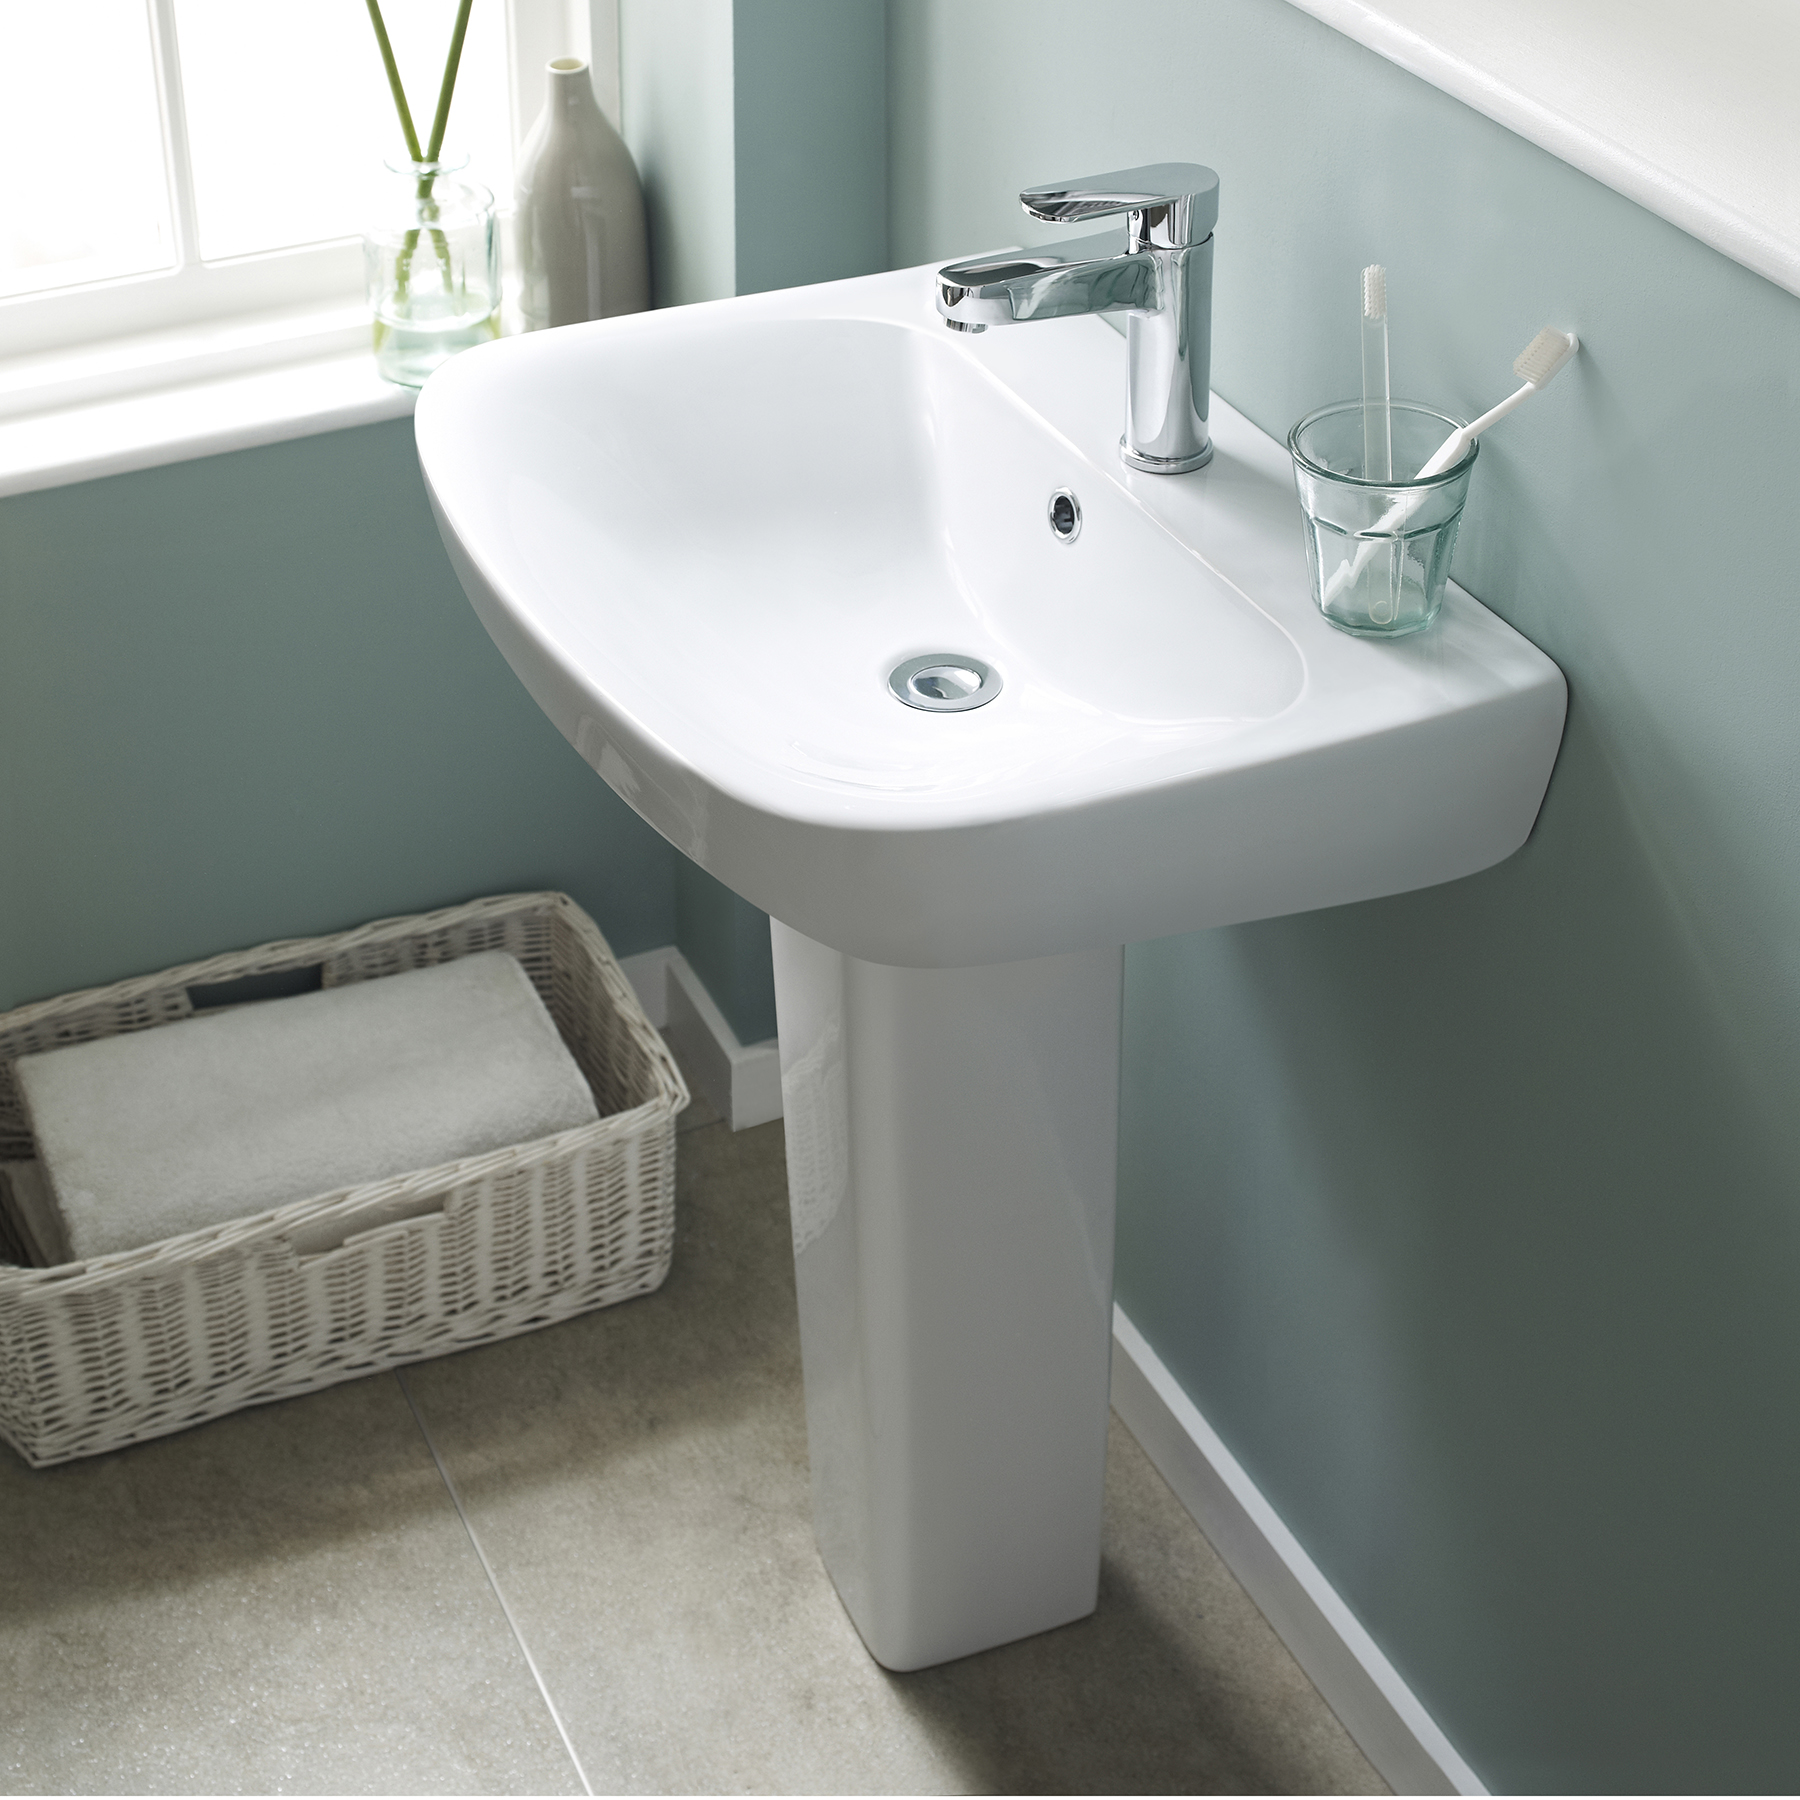 Toilet And Wash Basin For Small Spaces - Best Design Idea